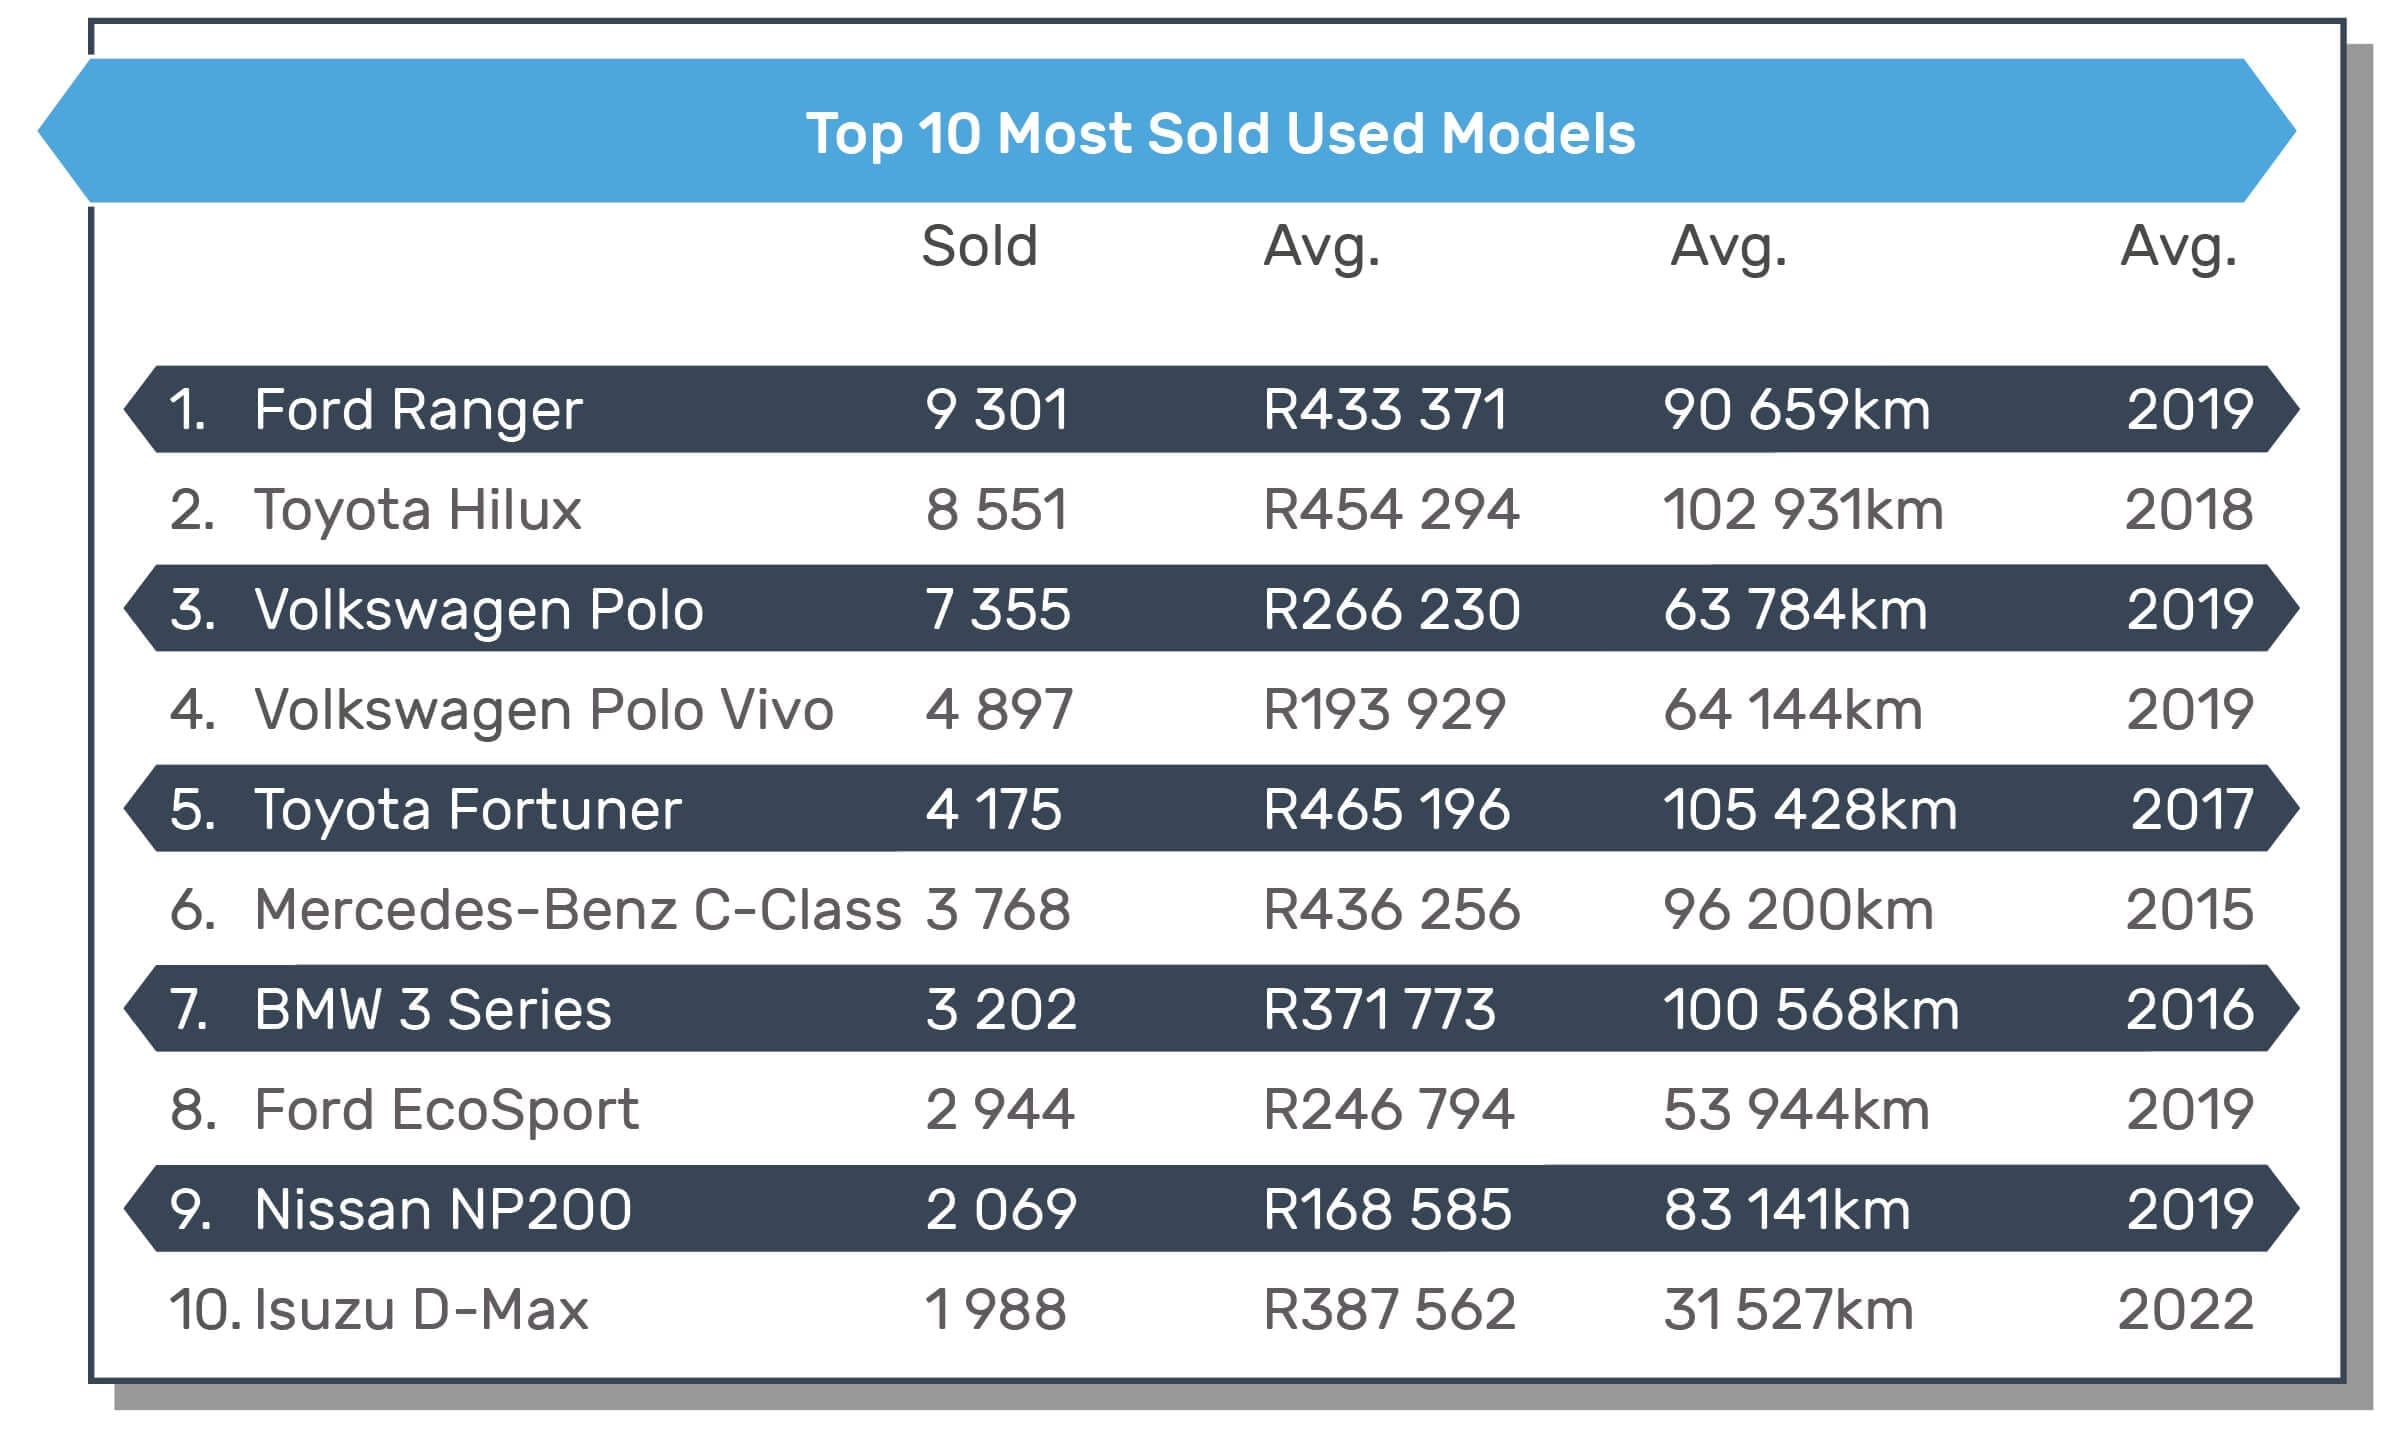 Most sold used models_AutoTrader 2023 Mid-Year Car Industry Report